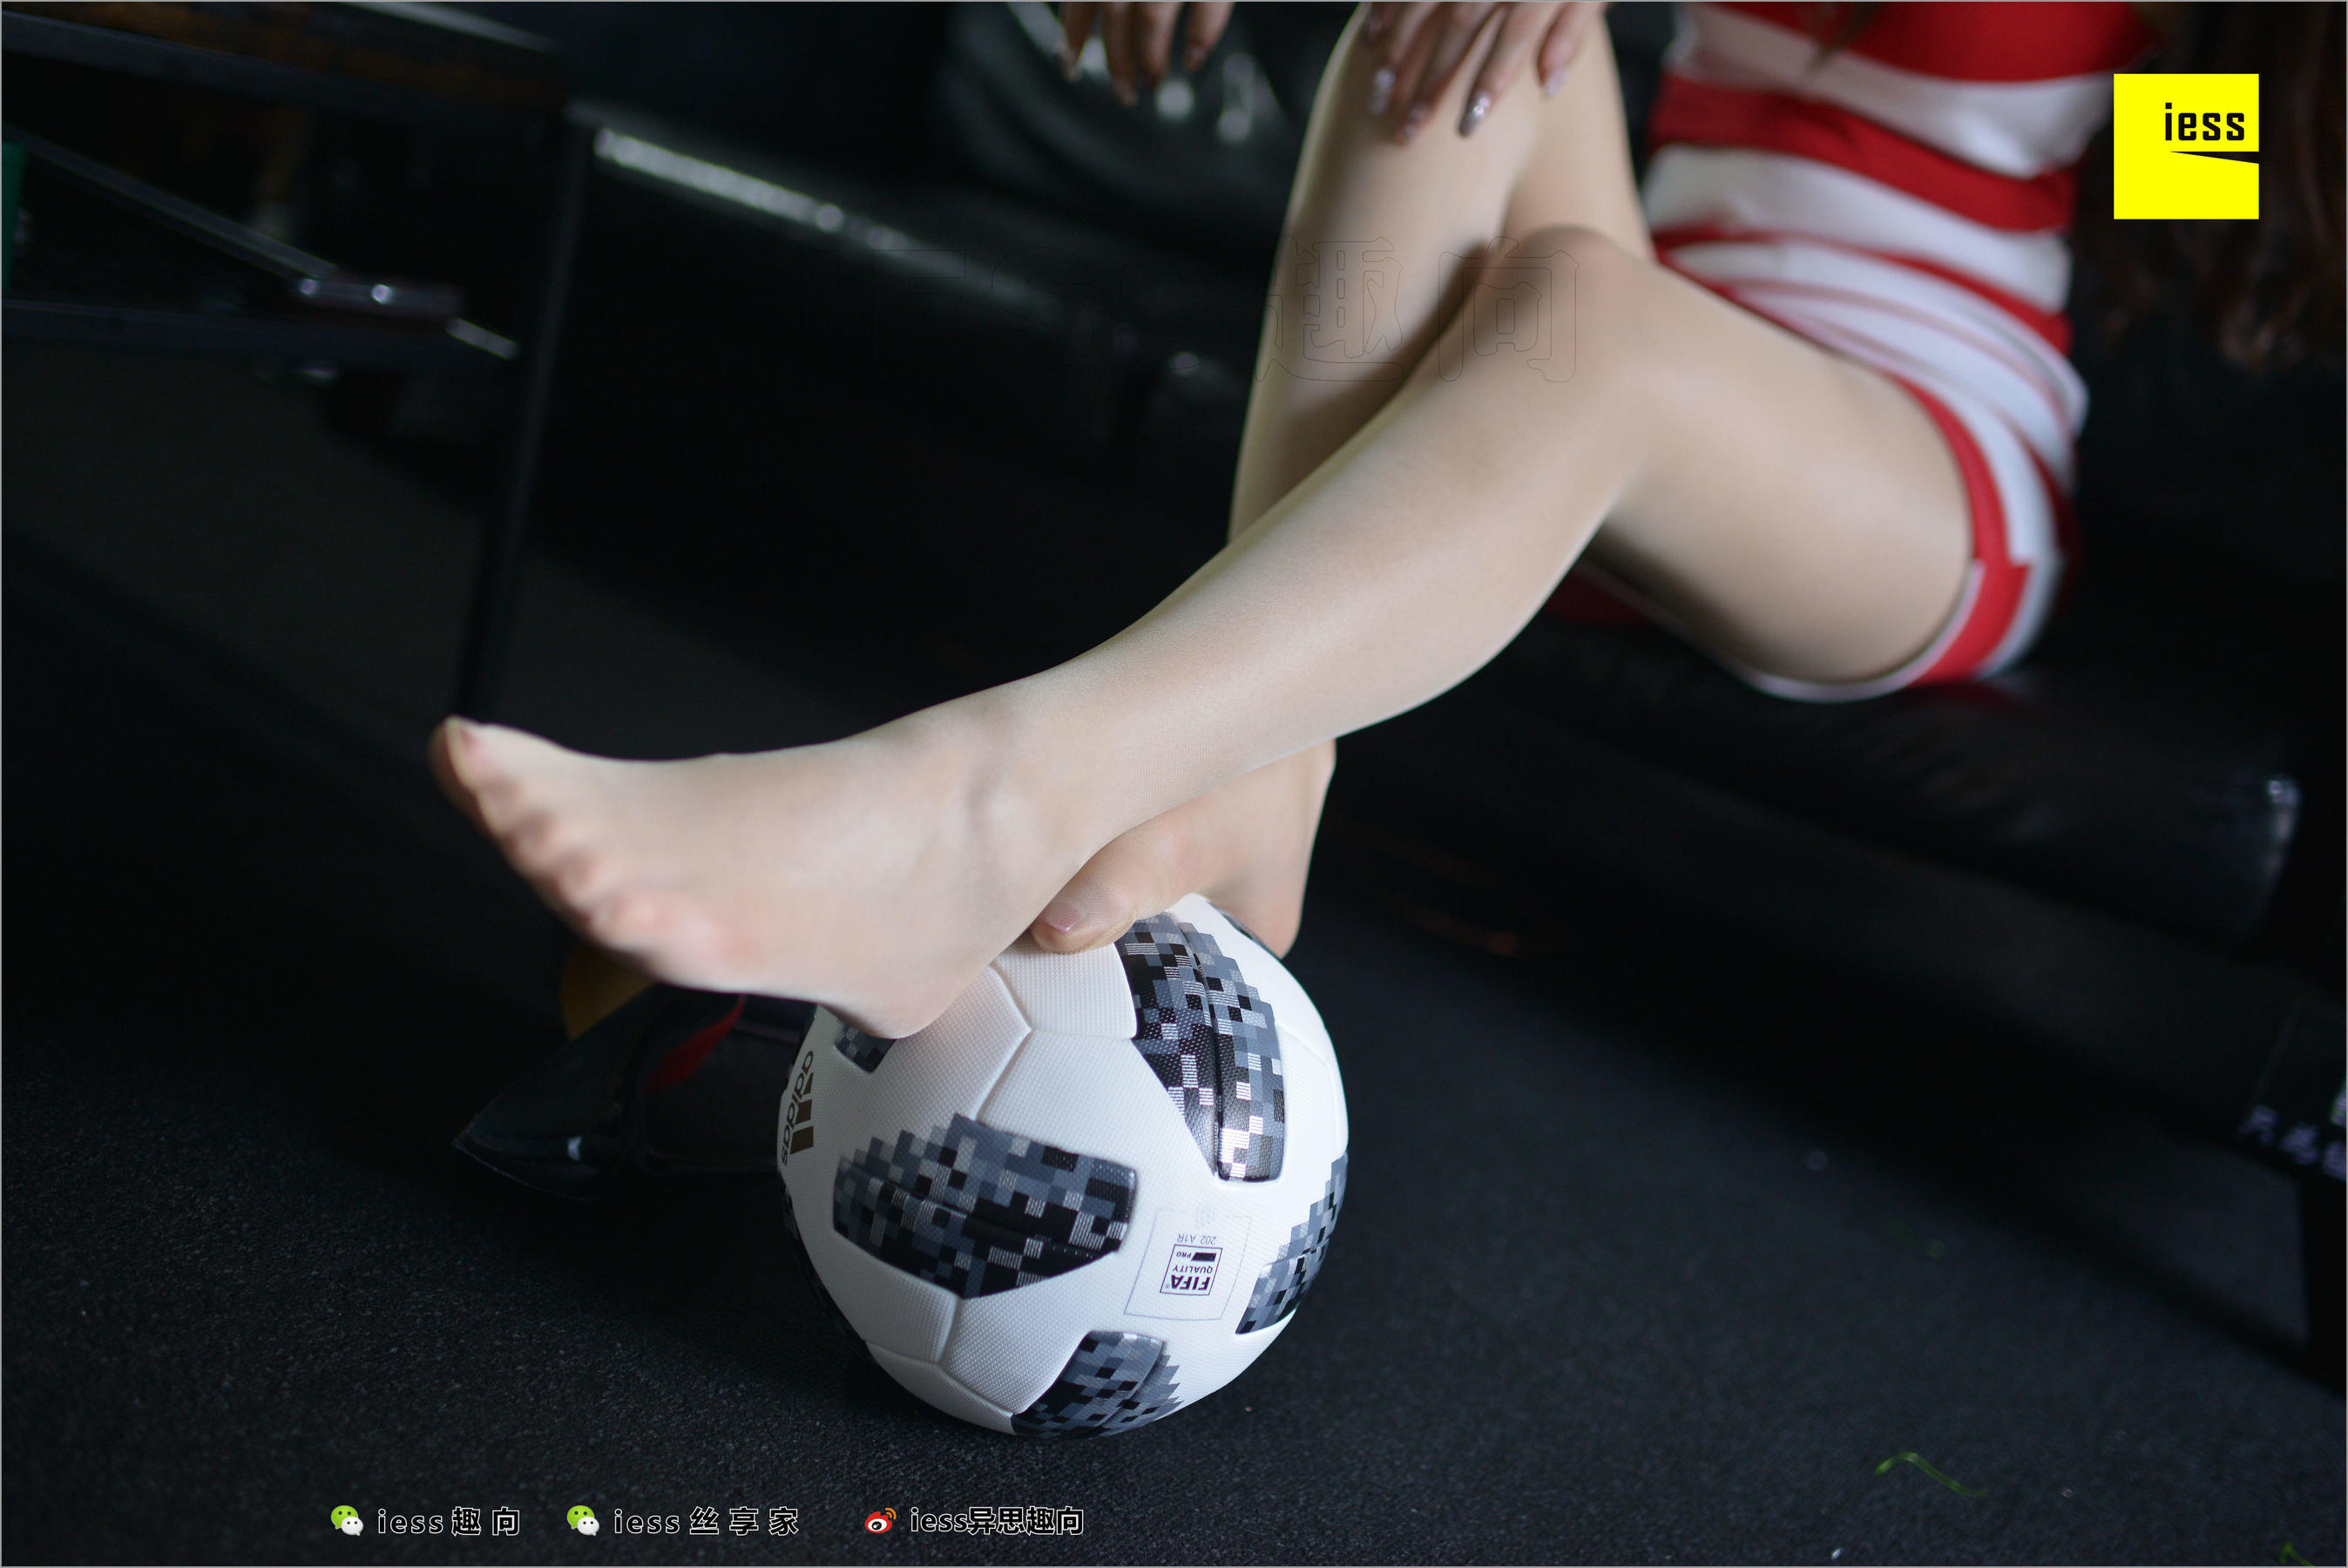 Yunzhi "Beer World Cup in Silk Stockings I-Knowing a Ball" [Iss Fun to IESS] Silky Foot Bento 248 Page 66 No.30a50a